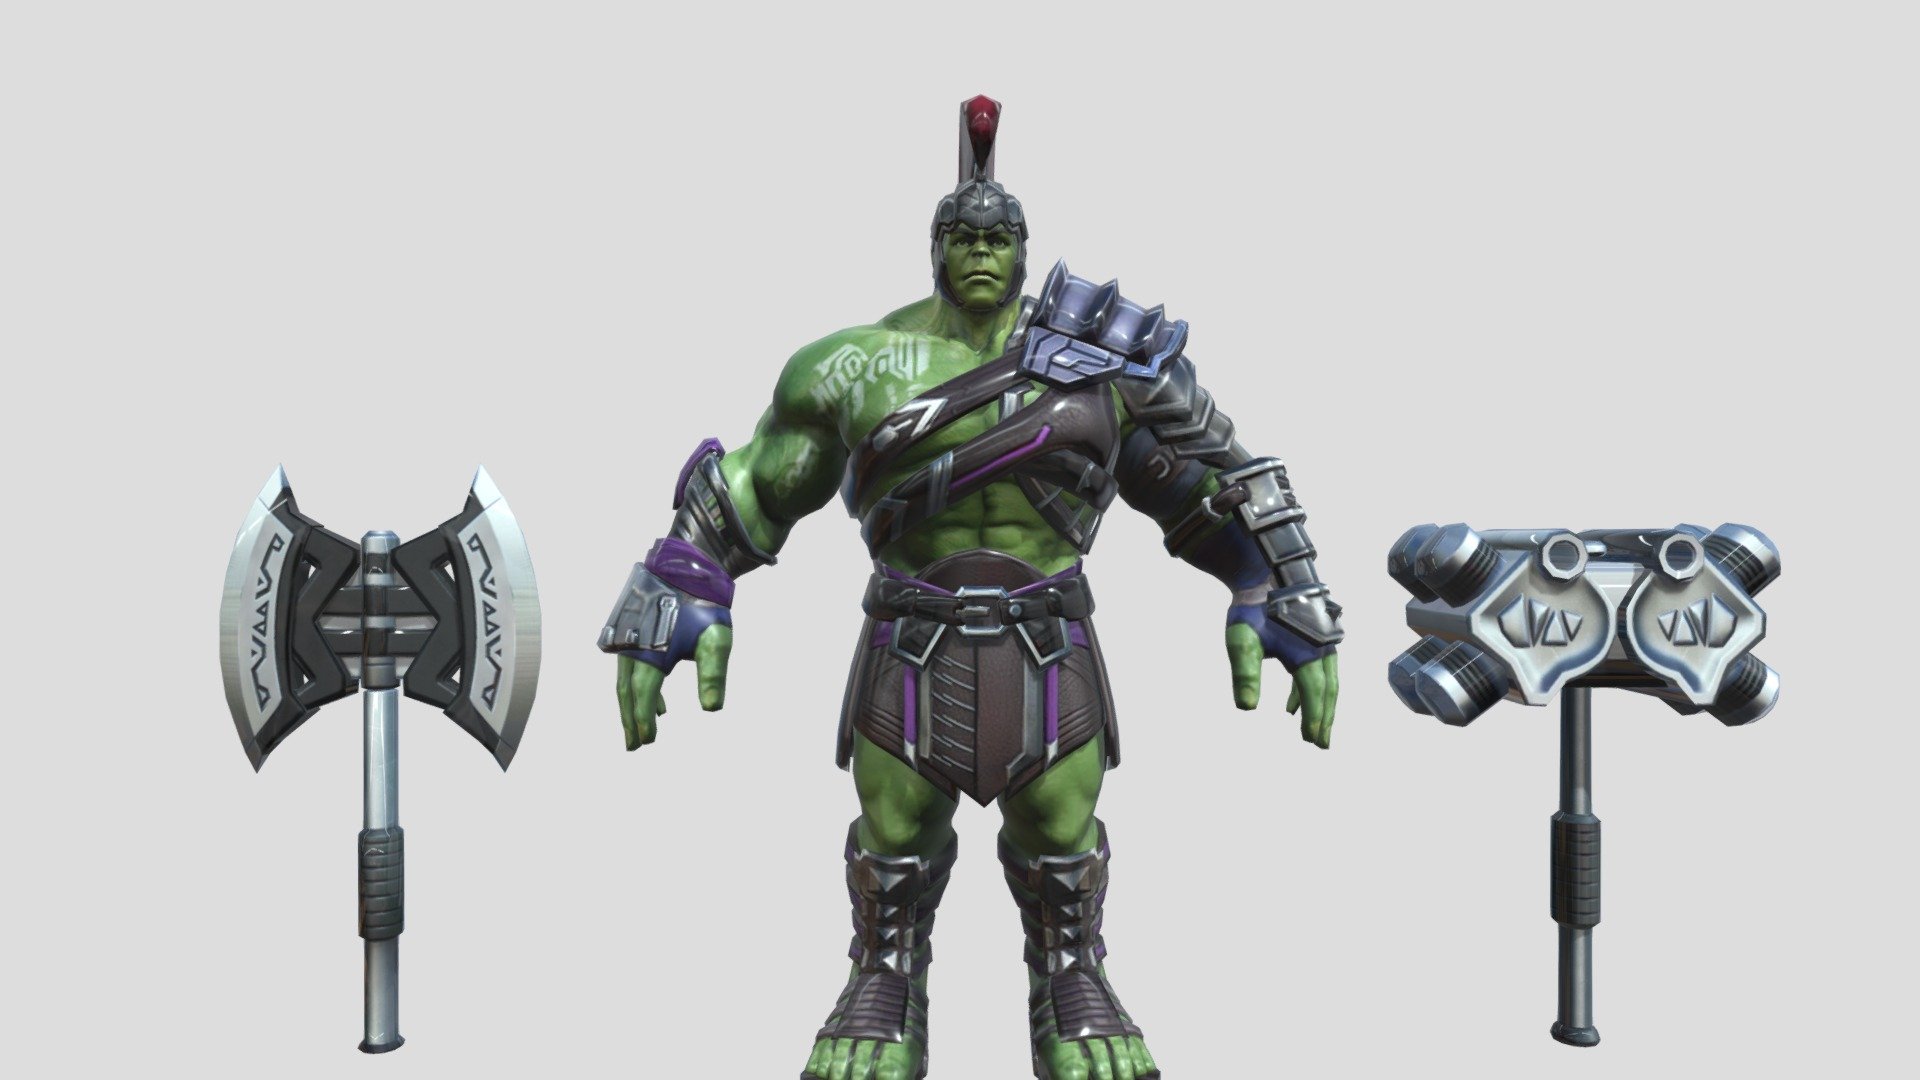 This is Ragnarok version of Hulk You can download it And can use on your Animations.

YouTube link : https://youtube.com/@BELORSE - Hulk:Ragnarok (Textured) (Rigged) - 3D model by 3D MODELS (@CAPTAAINR) 3d model